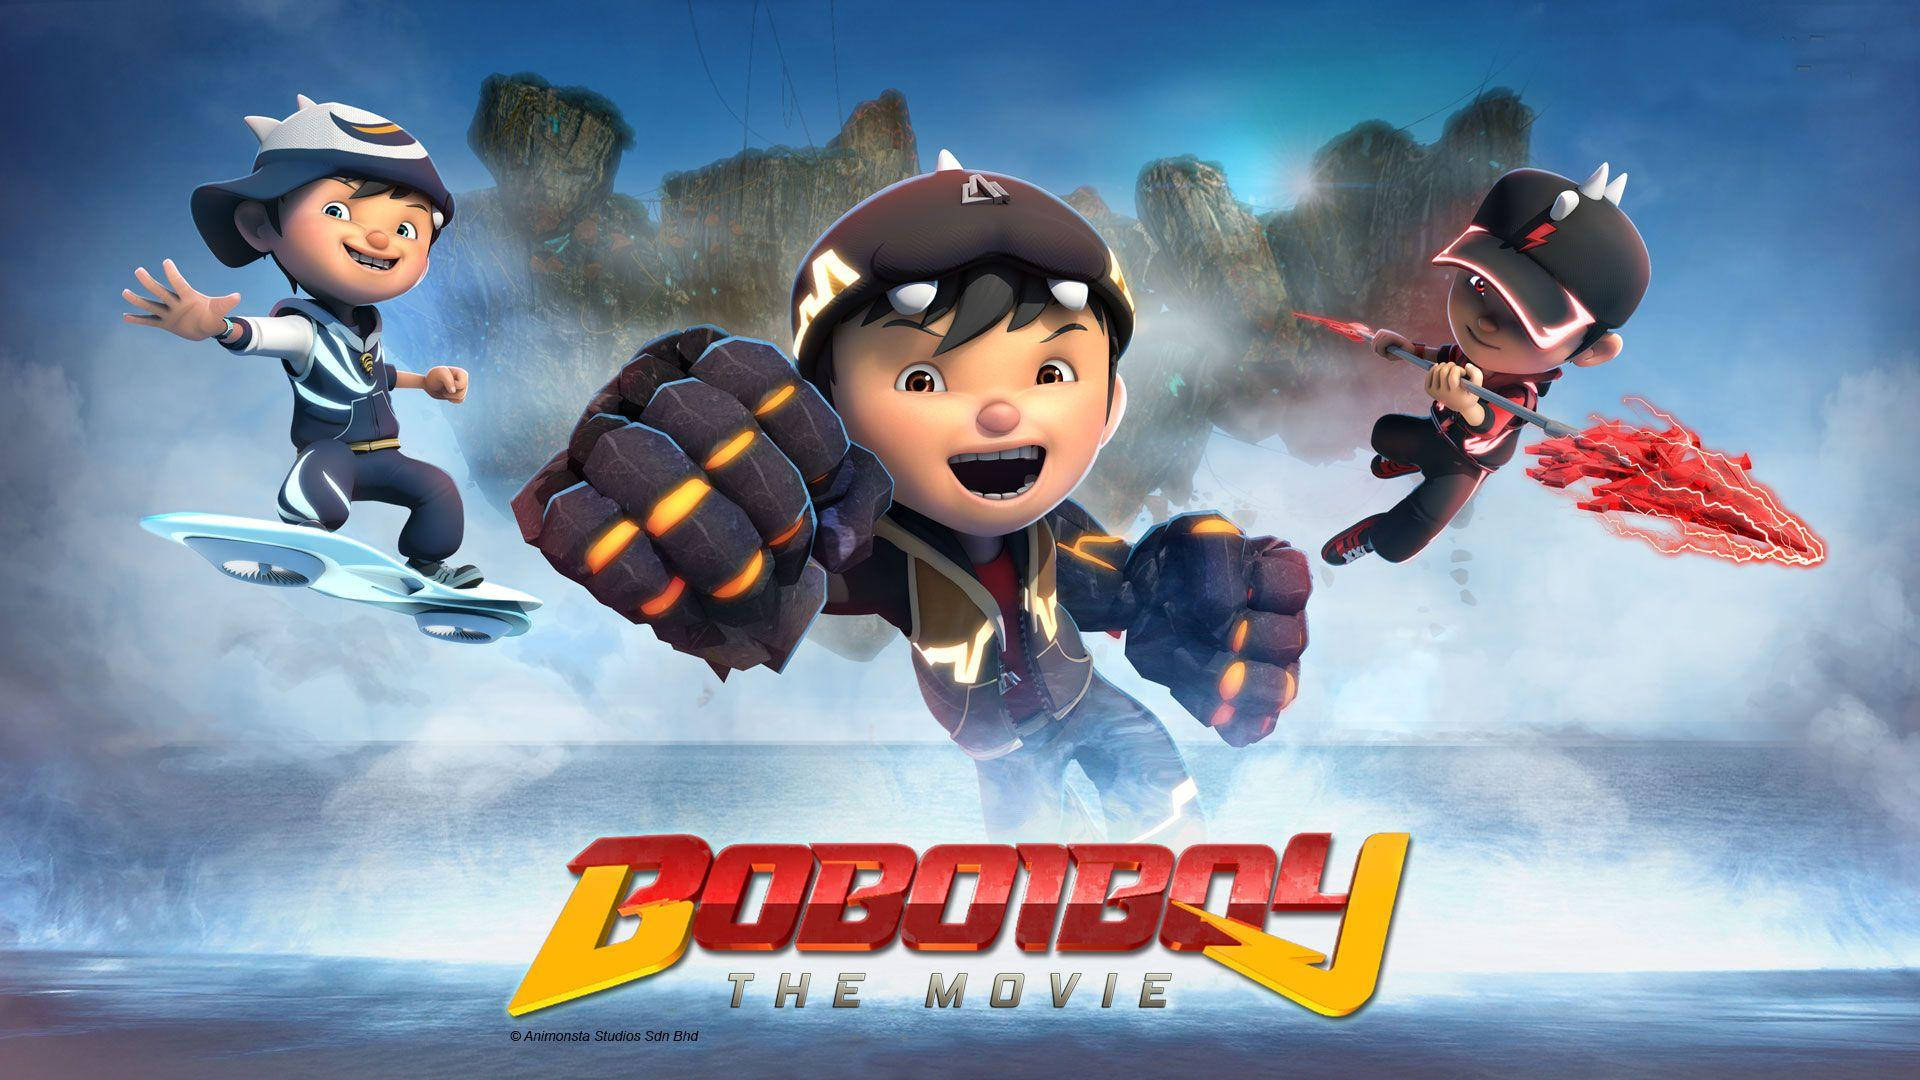 Free Boboiboy Pictures , [100+] Boboiboy Pictures for FREE 